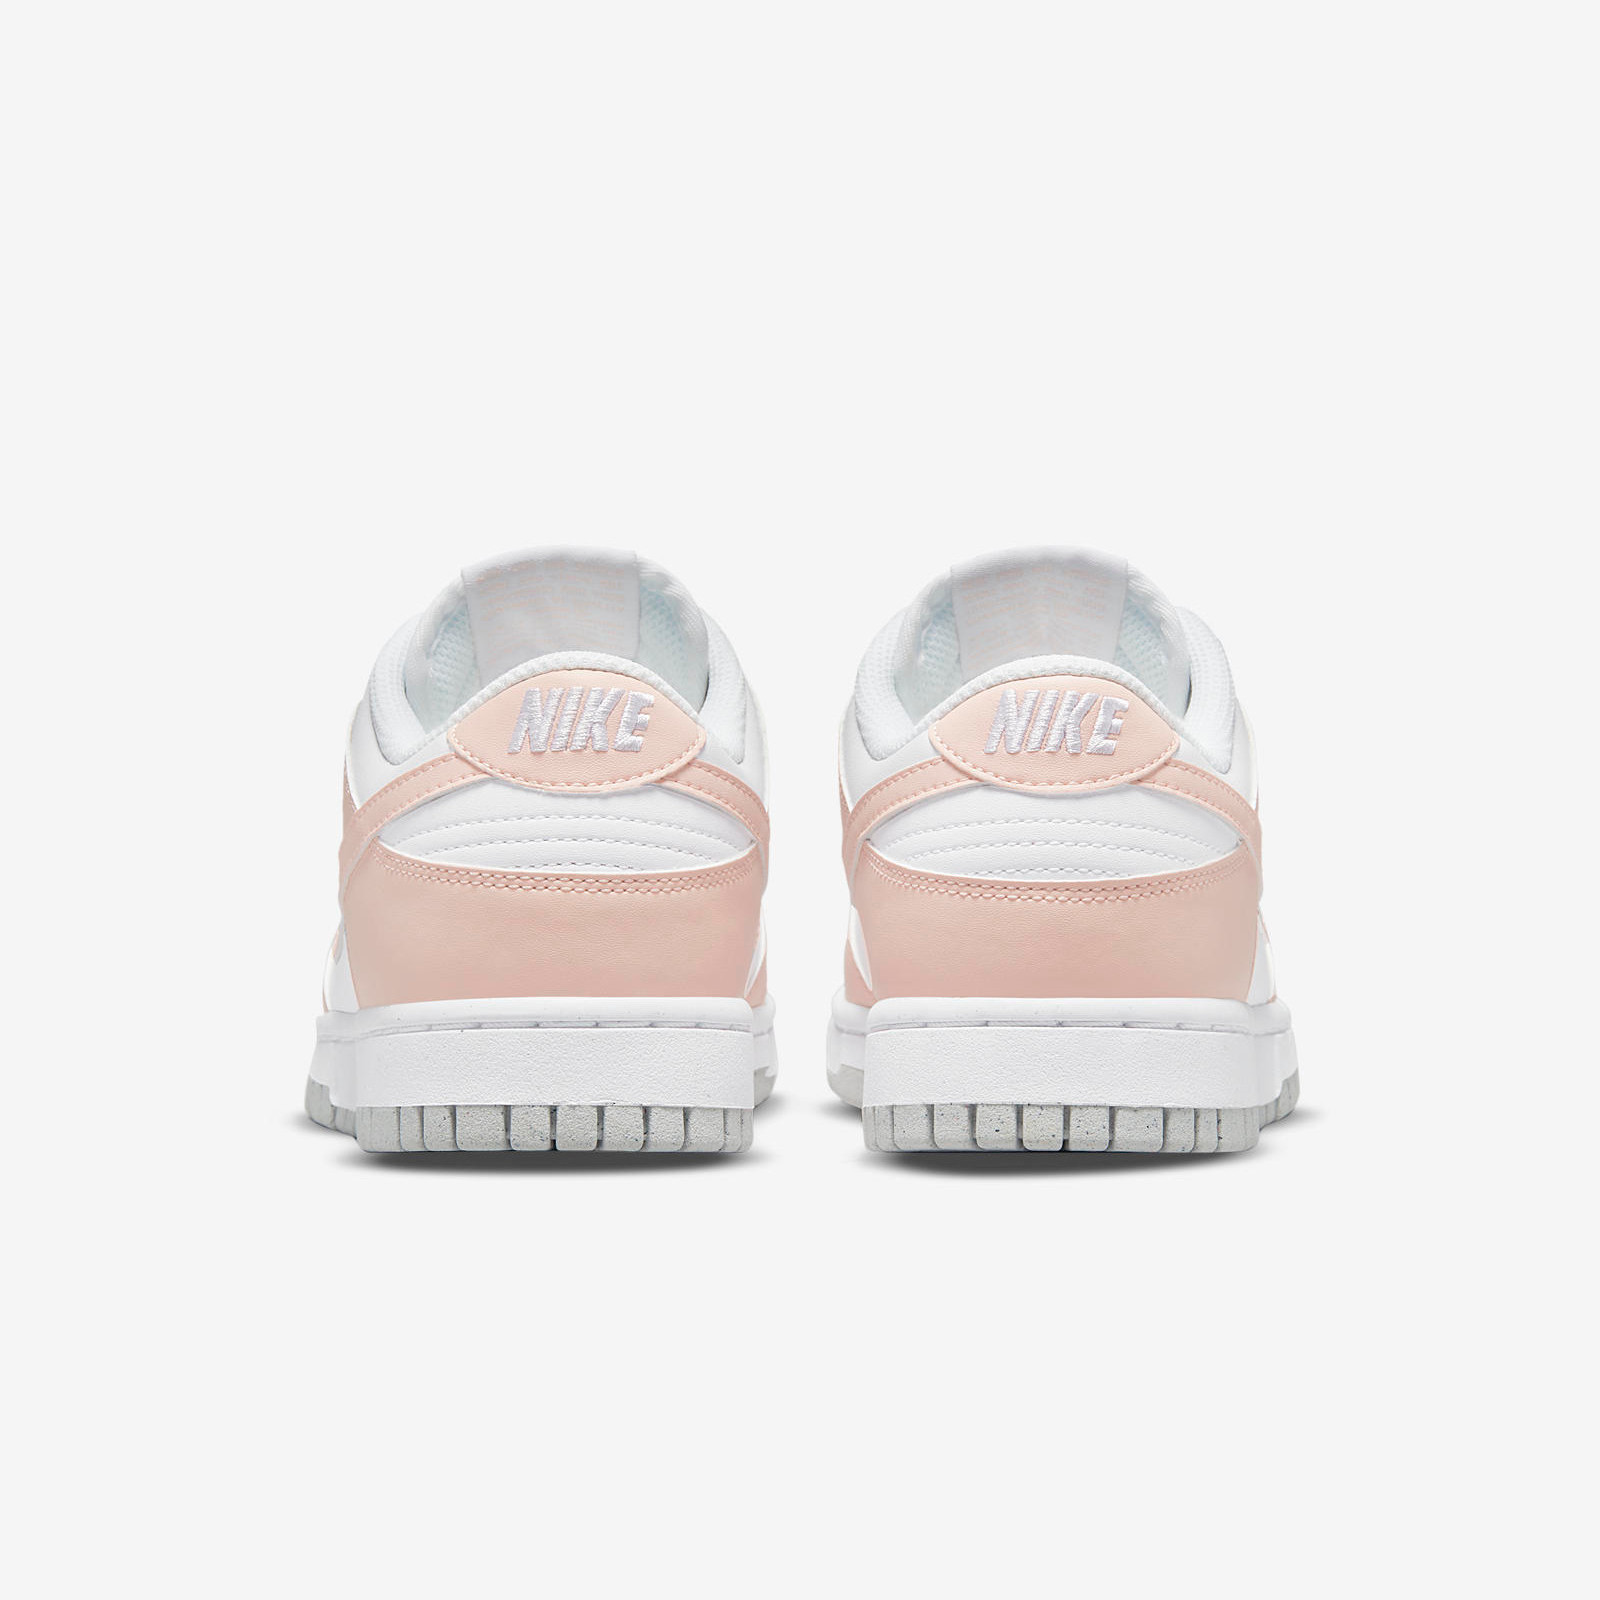 Nike Dunk Low
« Pale Coral »